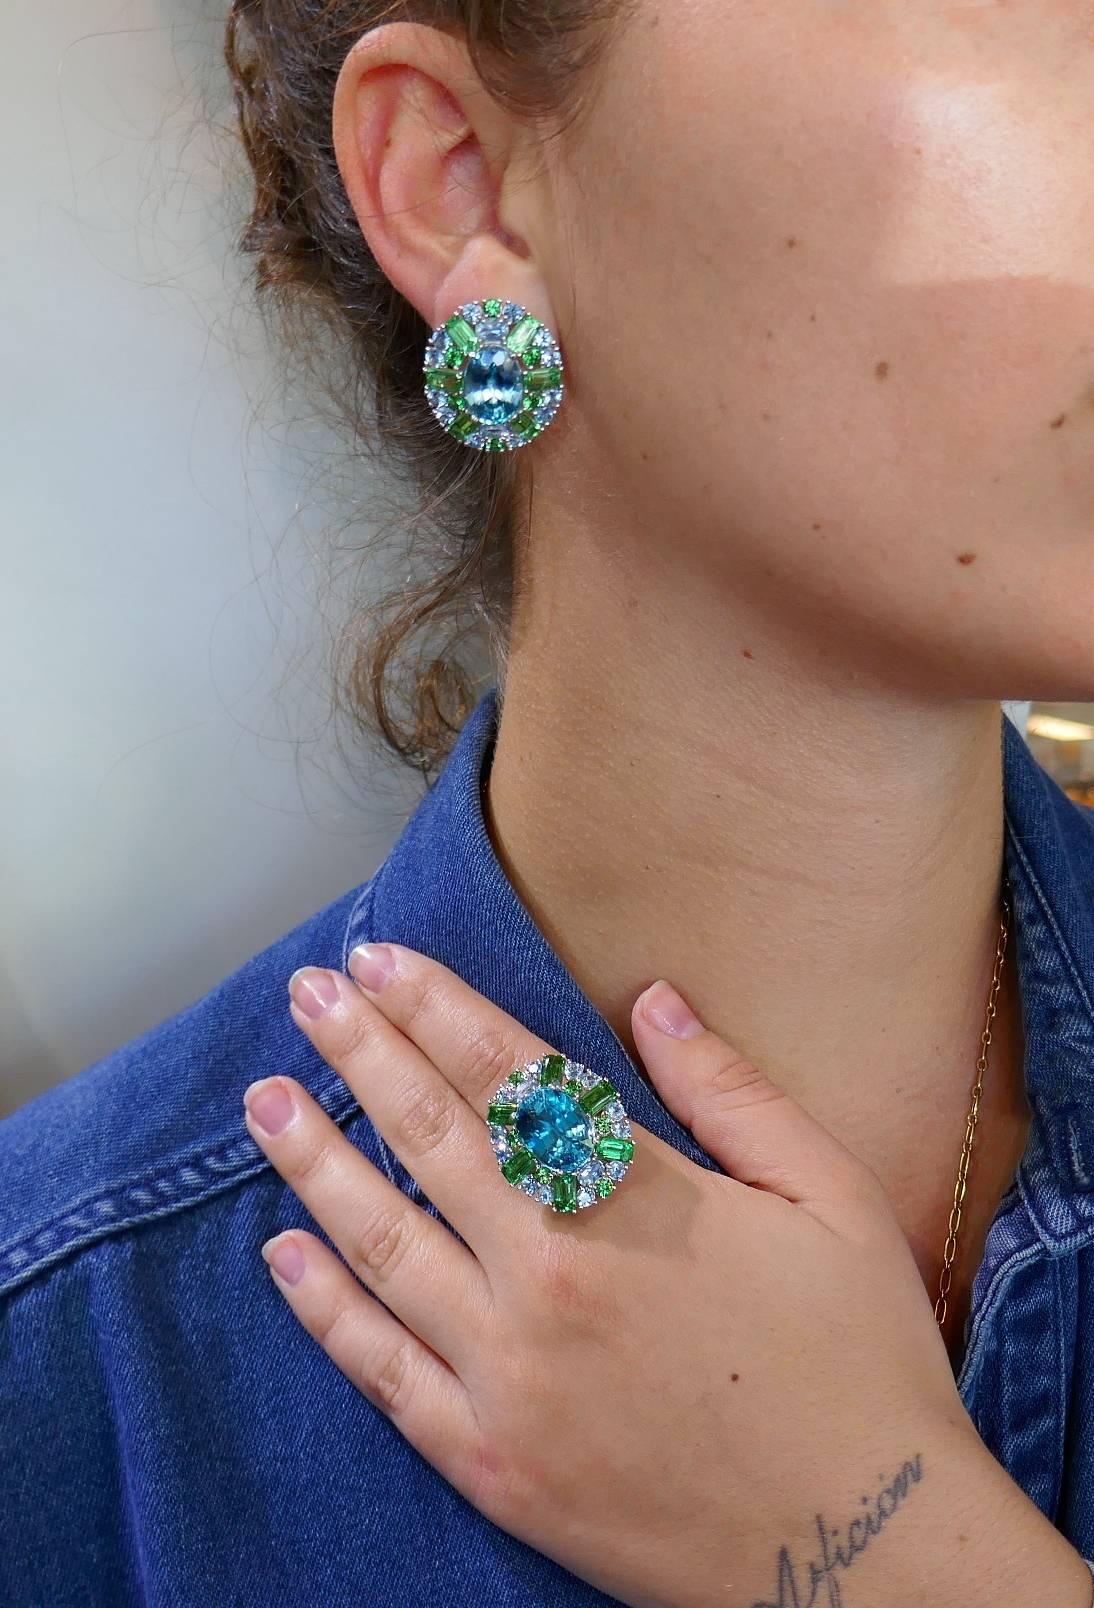 Colorful and chic multi-gem set consisting of a ring and a pair of earrings. Summery, elegant and wearable, the set is a great addition to your jewelry collection.
The set is made of platinum and features beautiful color blue zircons accented with